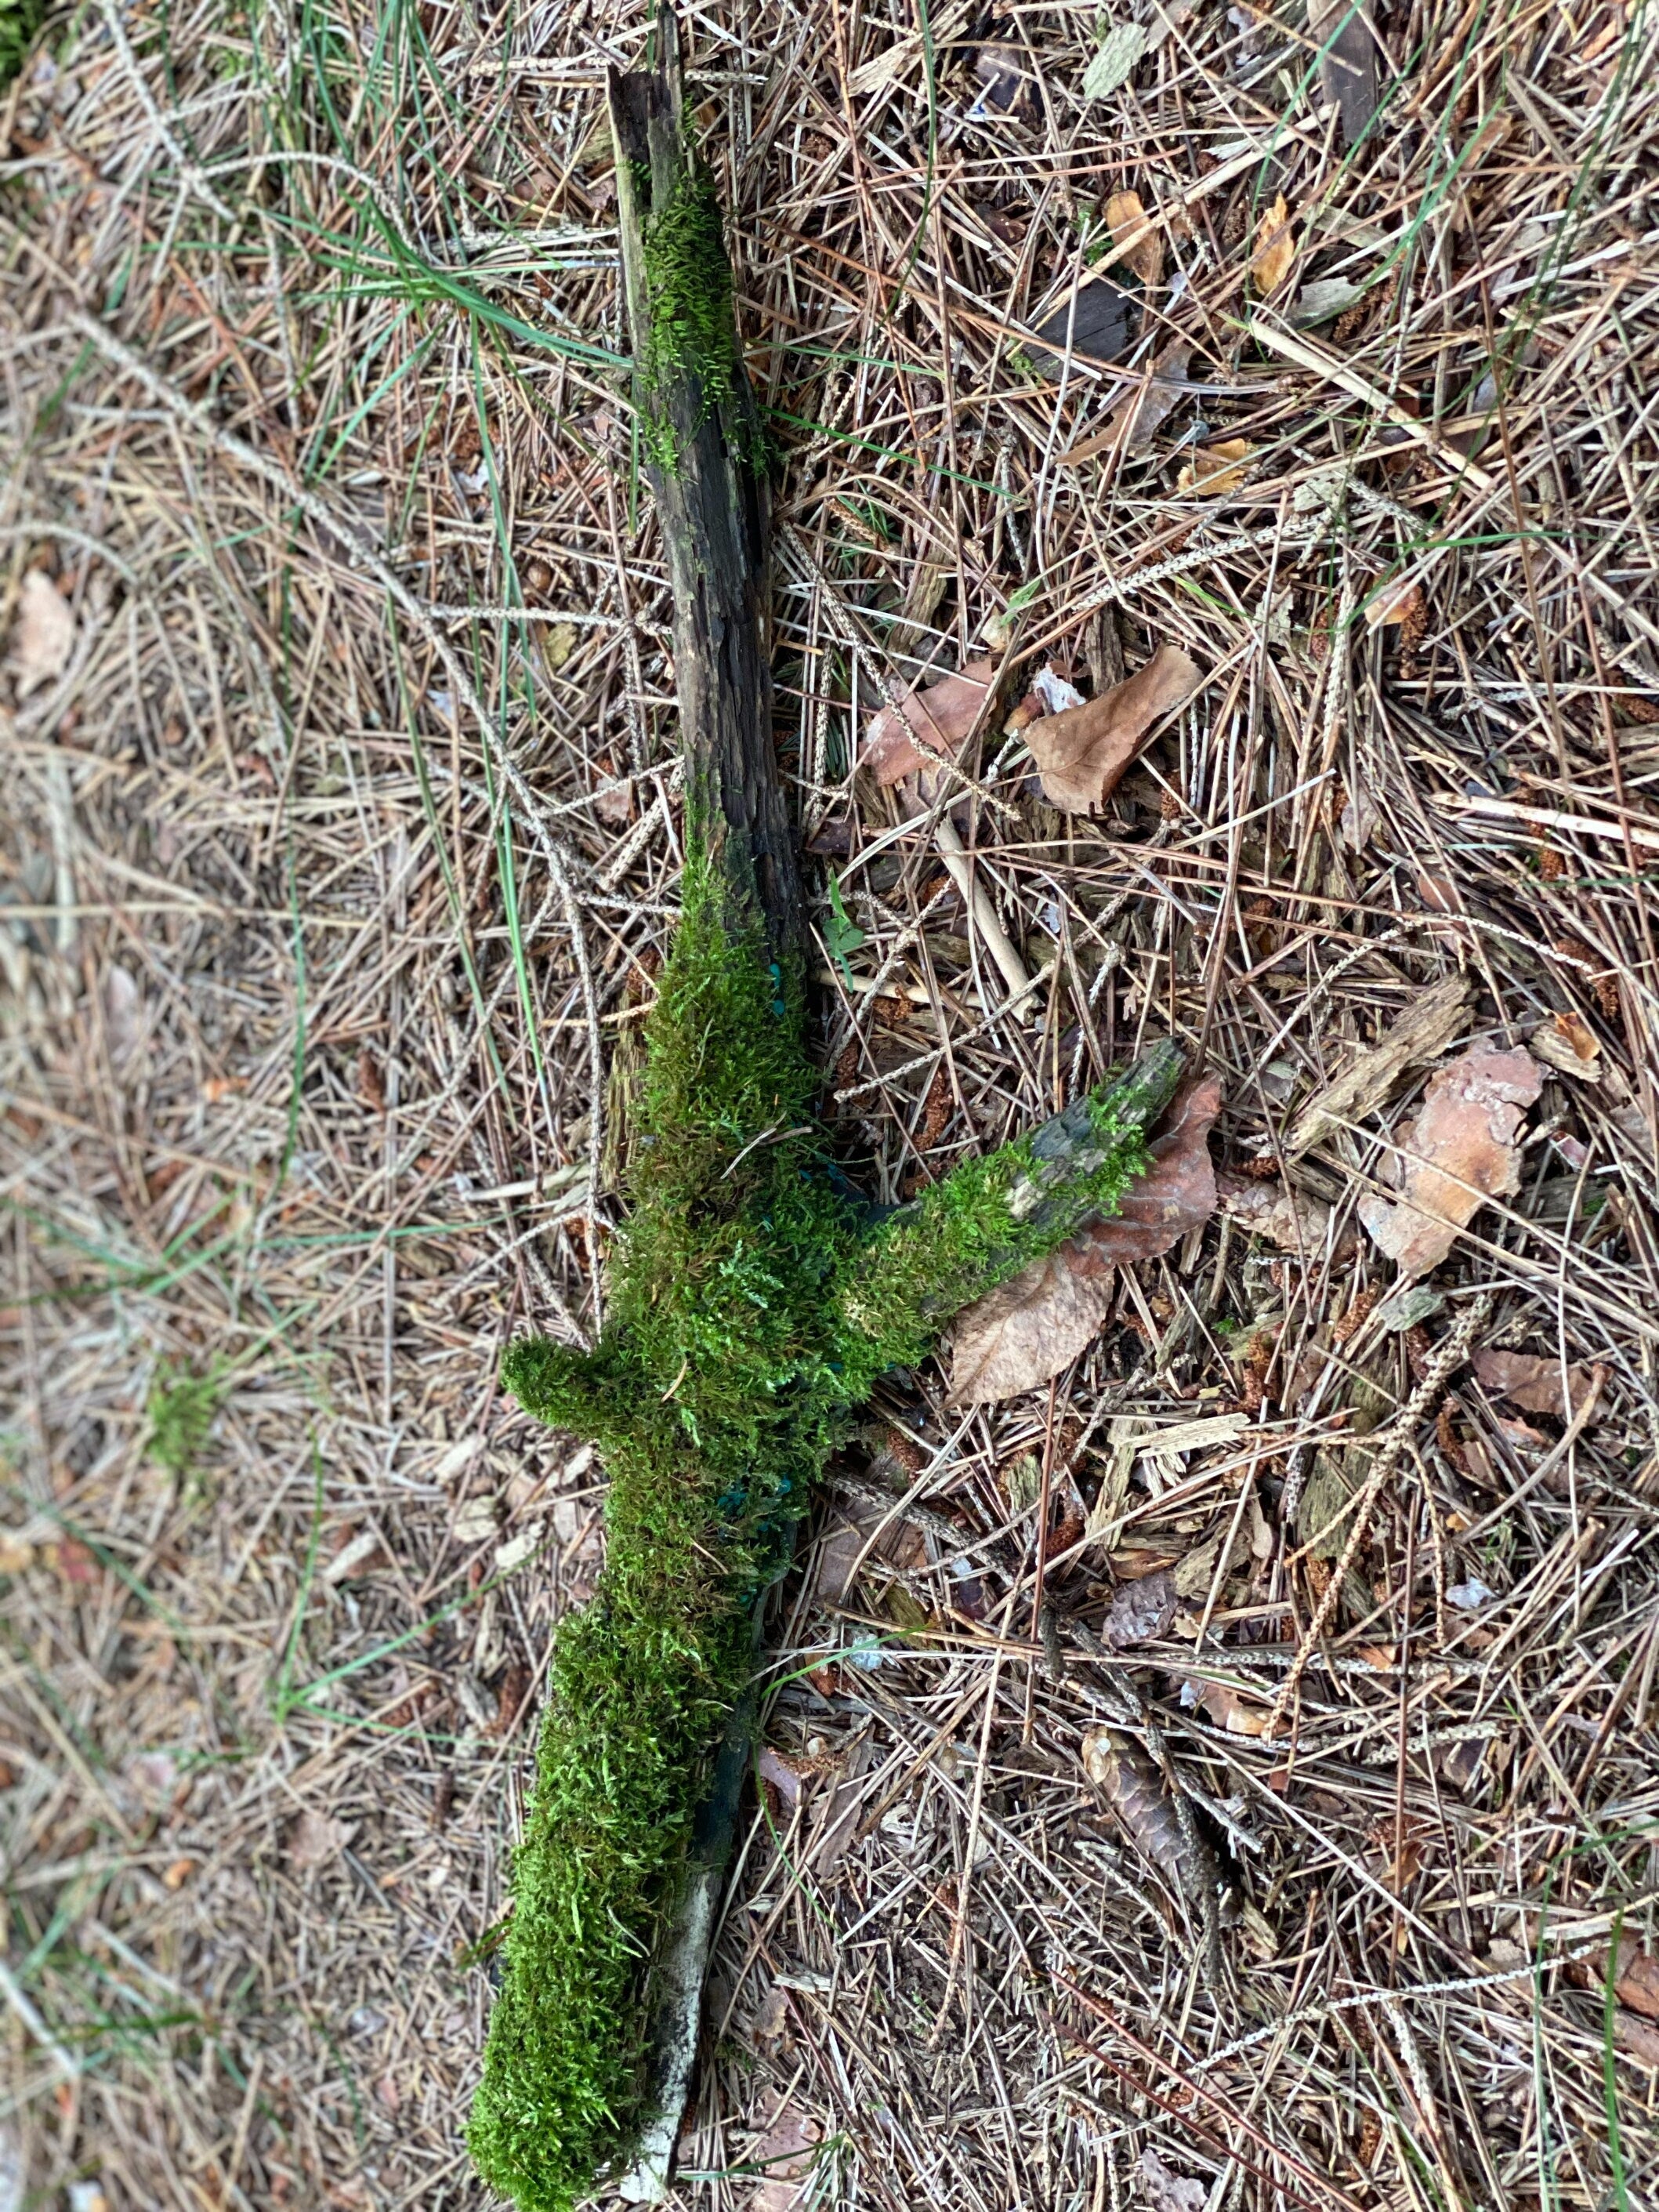 Live Moss on a Log, Mossy Log Approximately 19 Inches Long with a Width of 5 Inches and About 2.5 Inches High